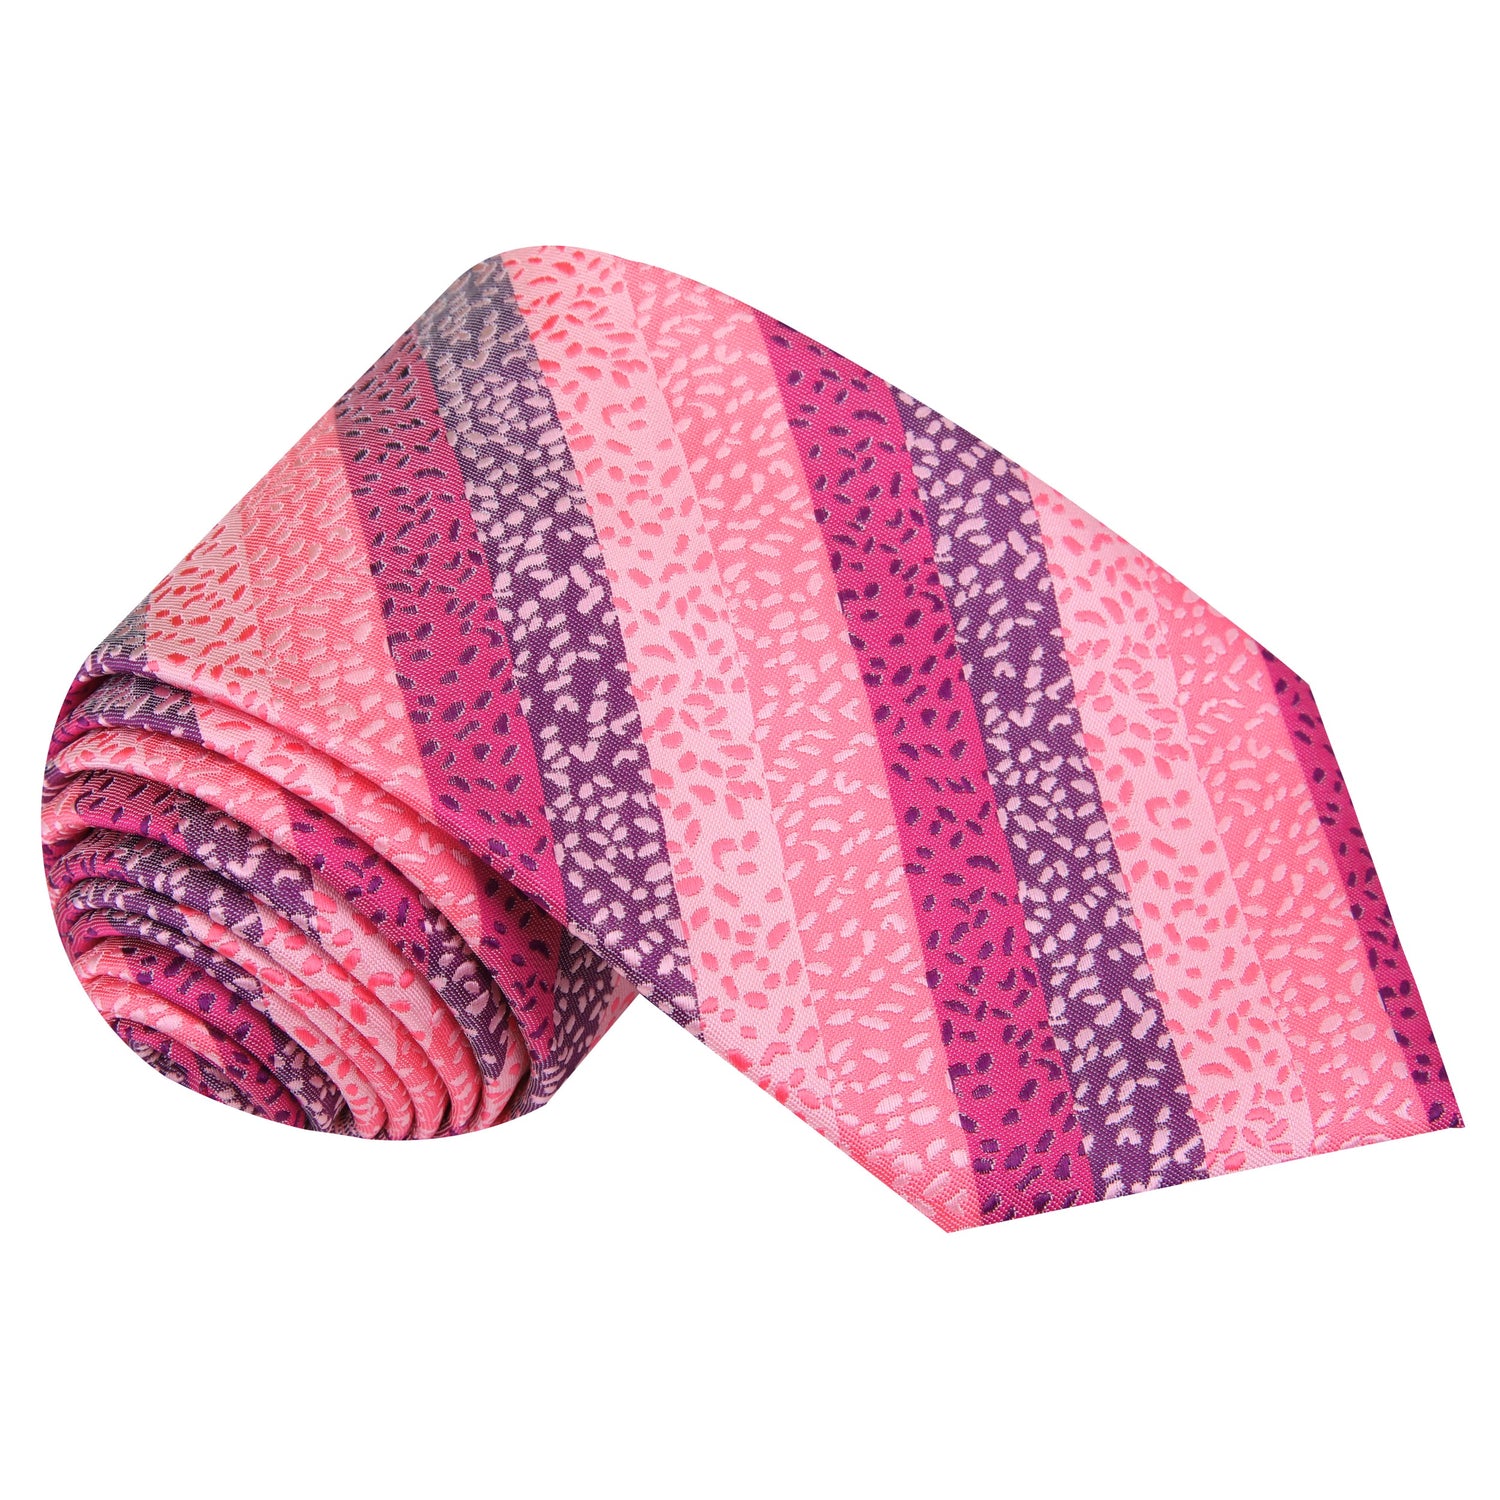 Shades of Pink with stripes and texture silk tie